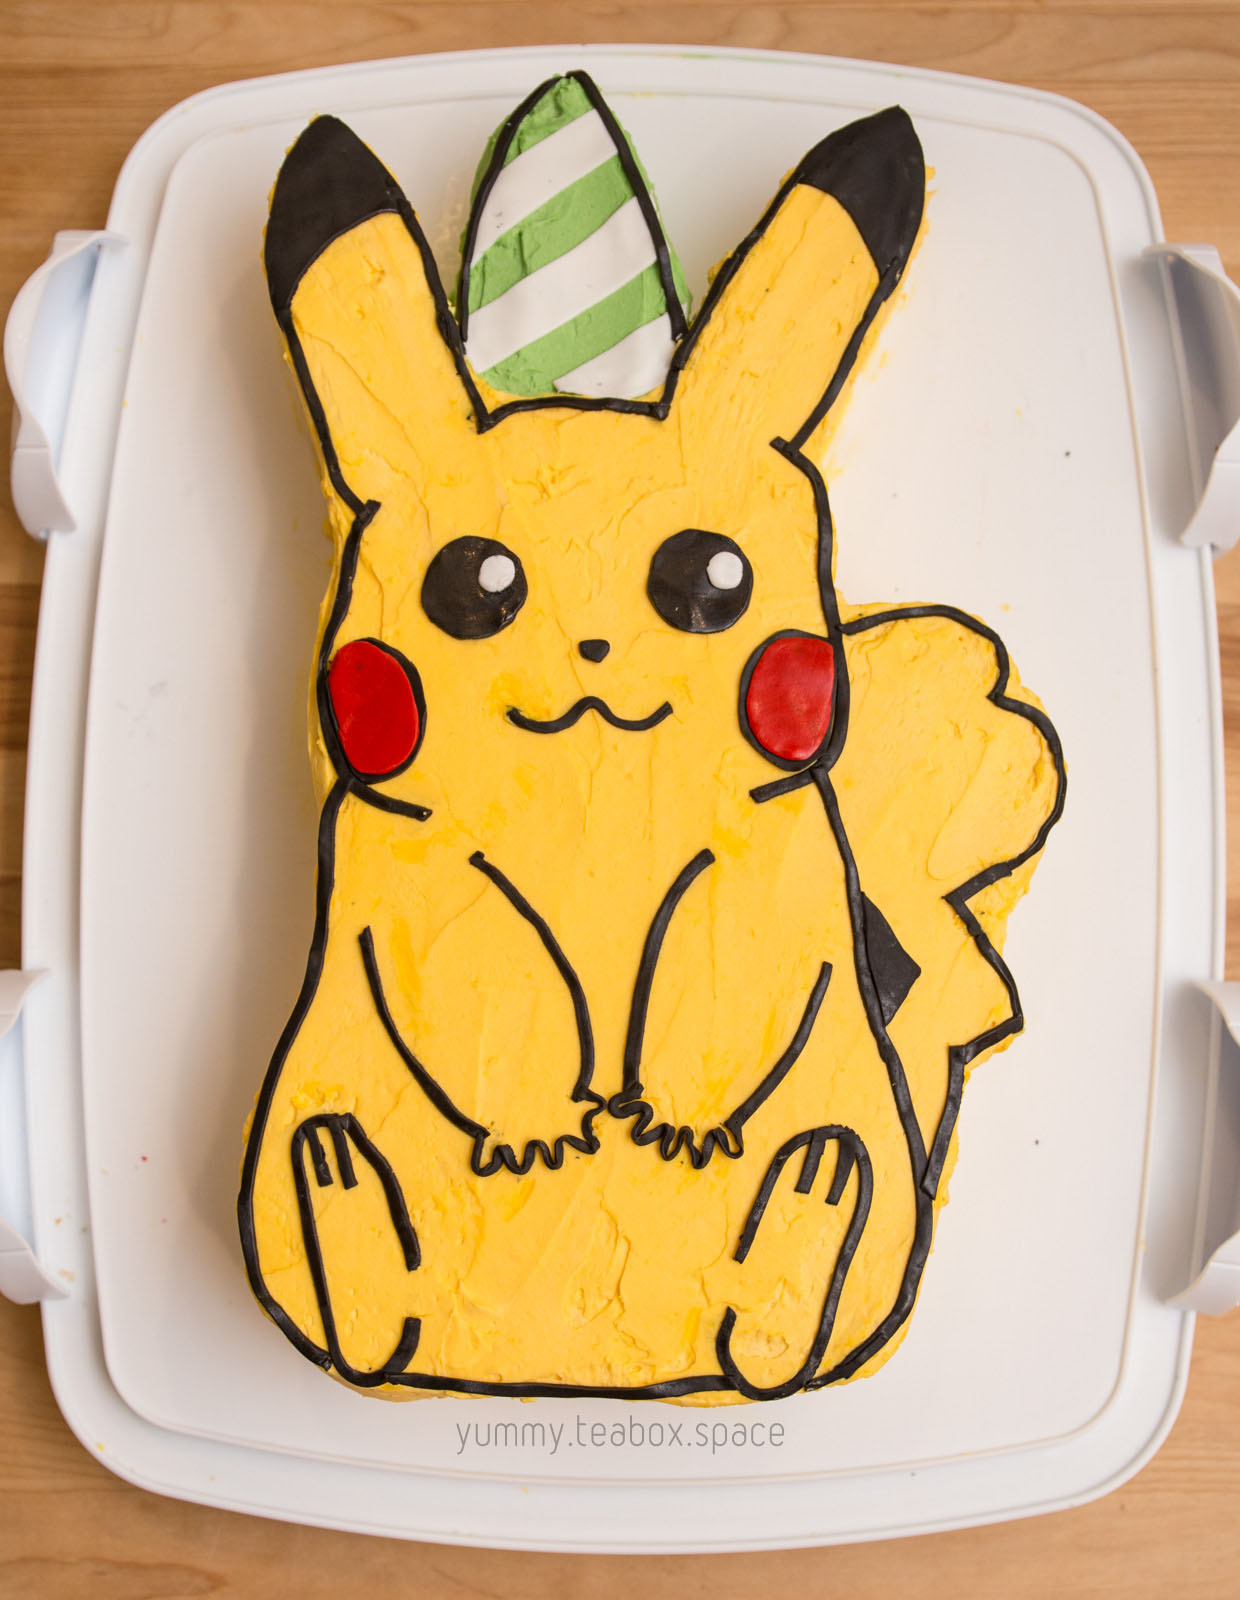 Cake that looks like a sitting Pikachu with a party hat.